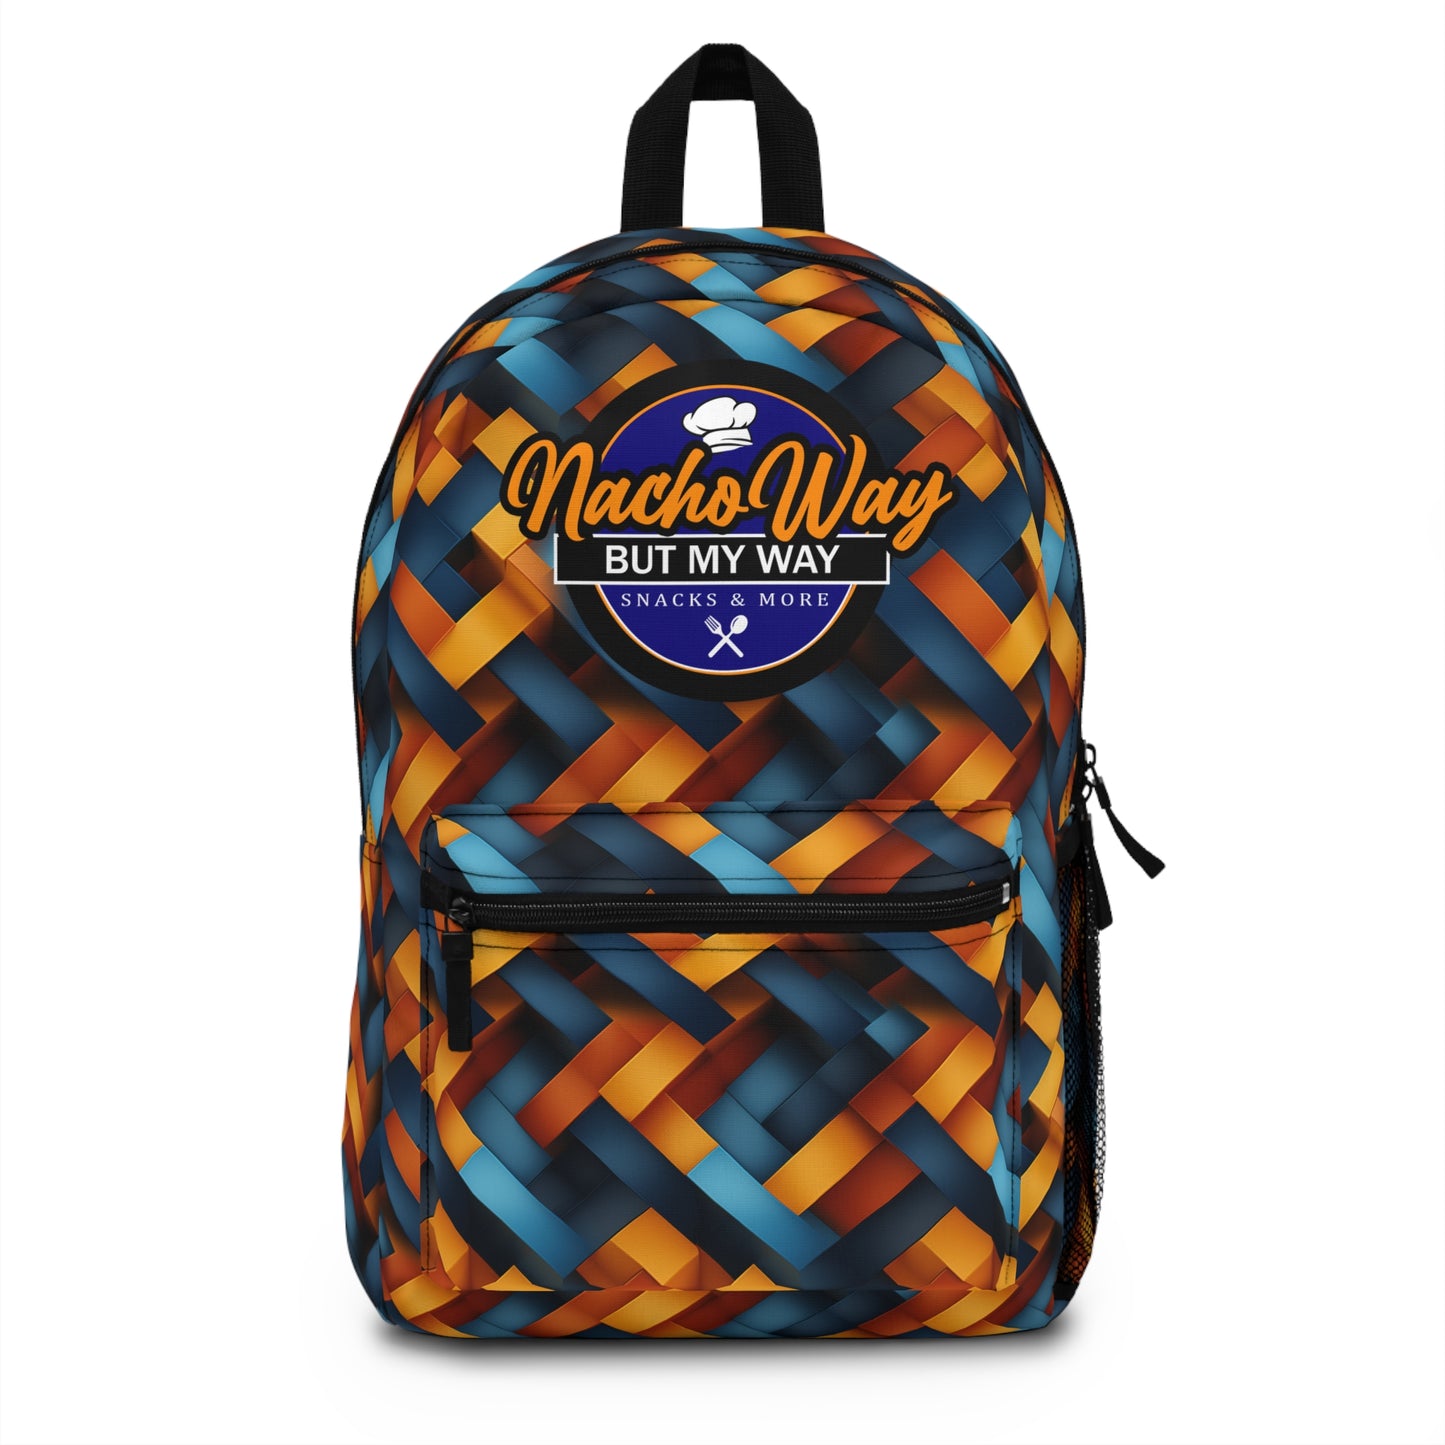 NachoWay “A-Maze-Ing” Backpack